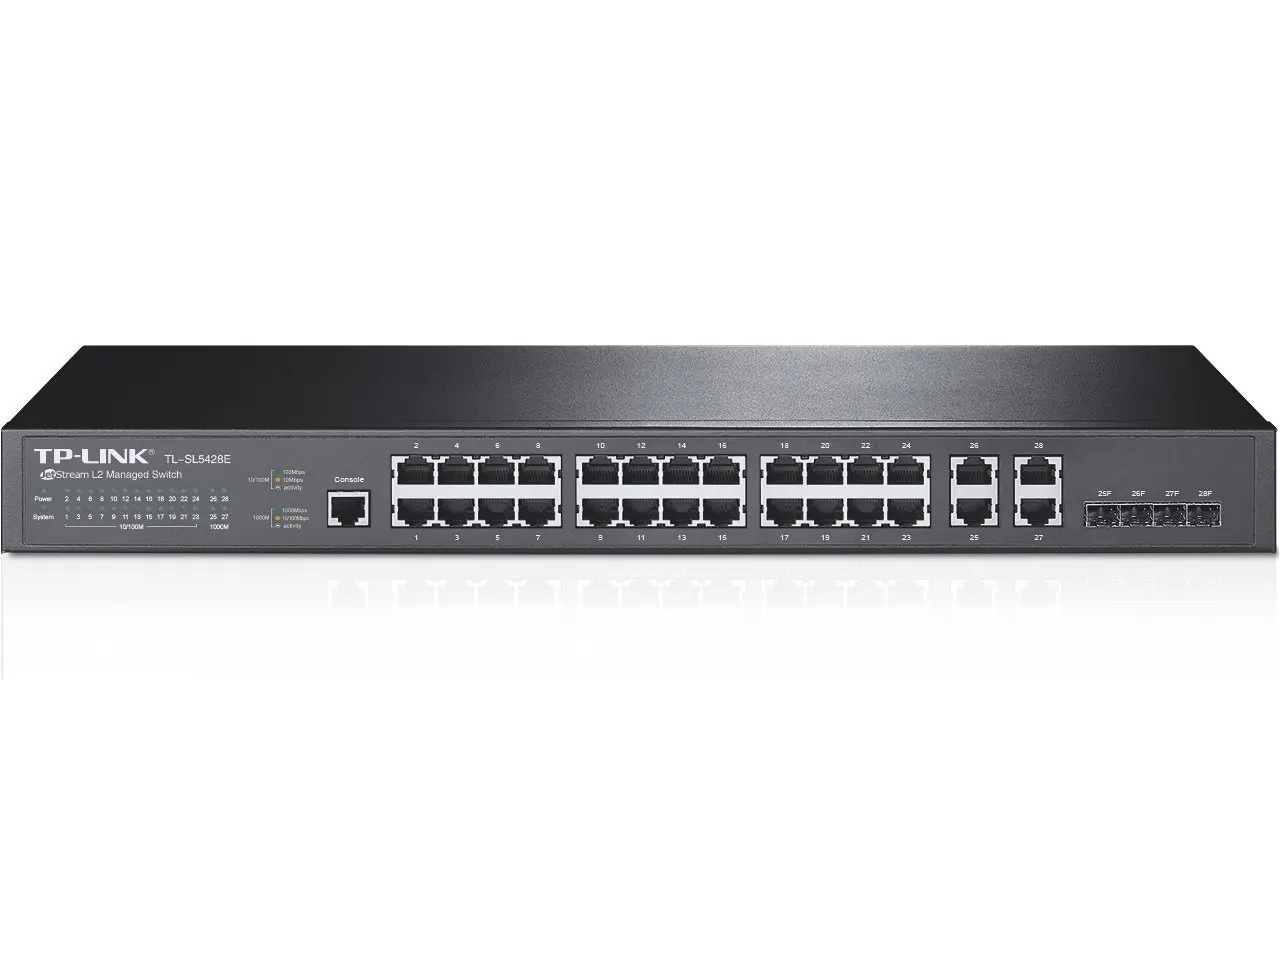 Cheap Tp Link Managed Switch Find Tp Link Managed Switch Deals On Line At Alibaba Com